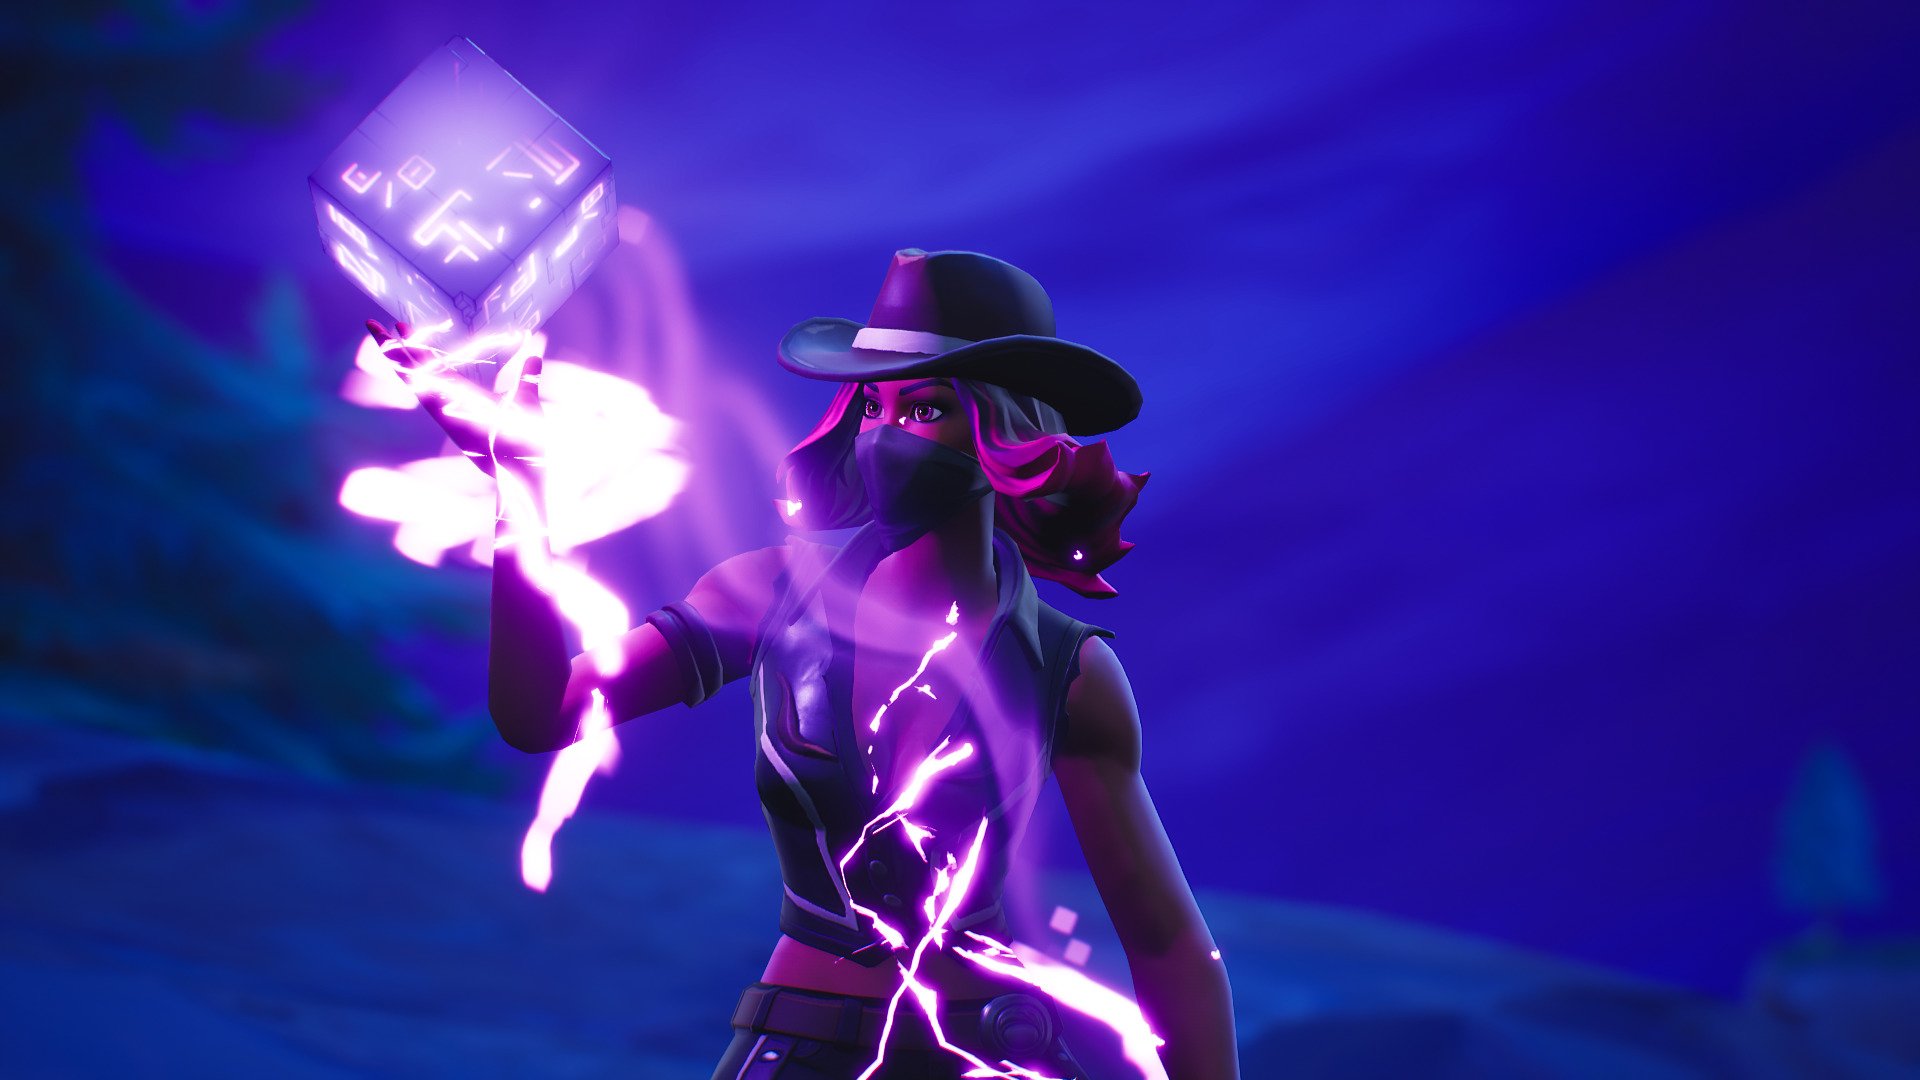 Calamity Fortnite Cube By Davidbellver Wallpaper And